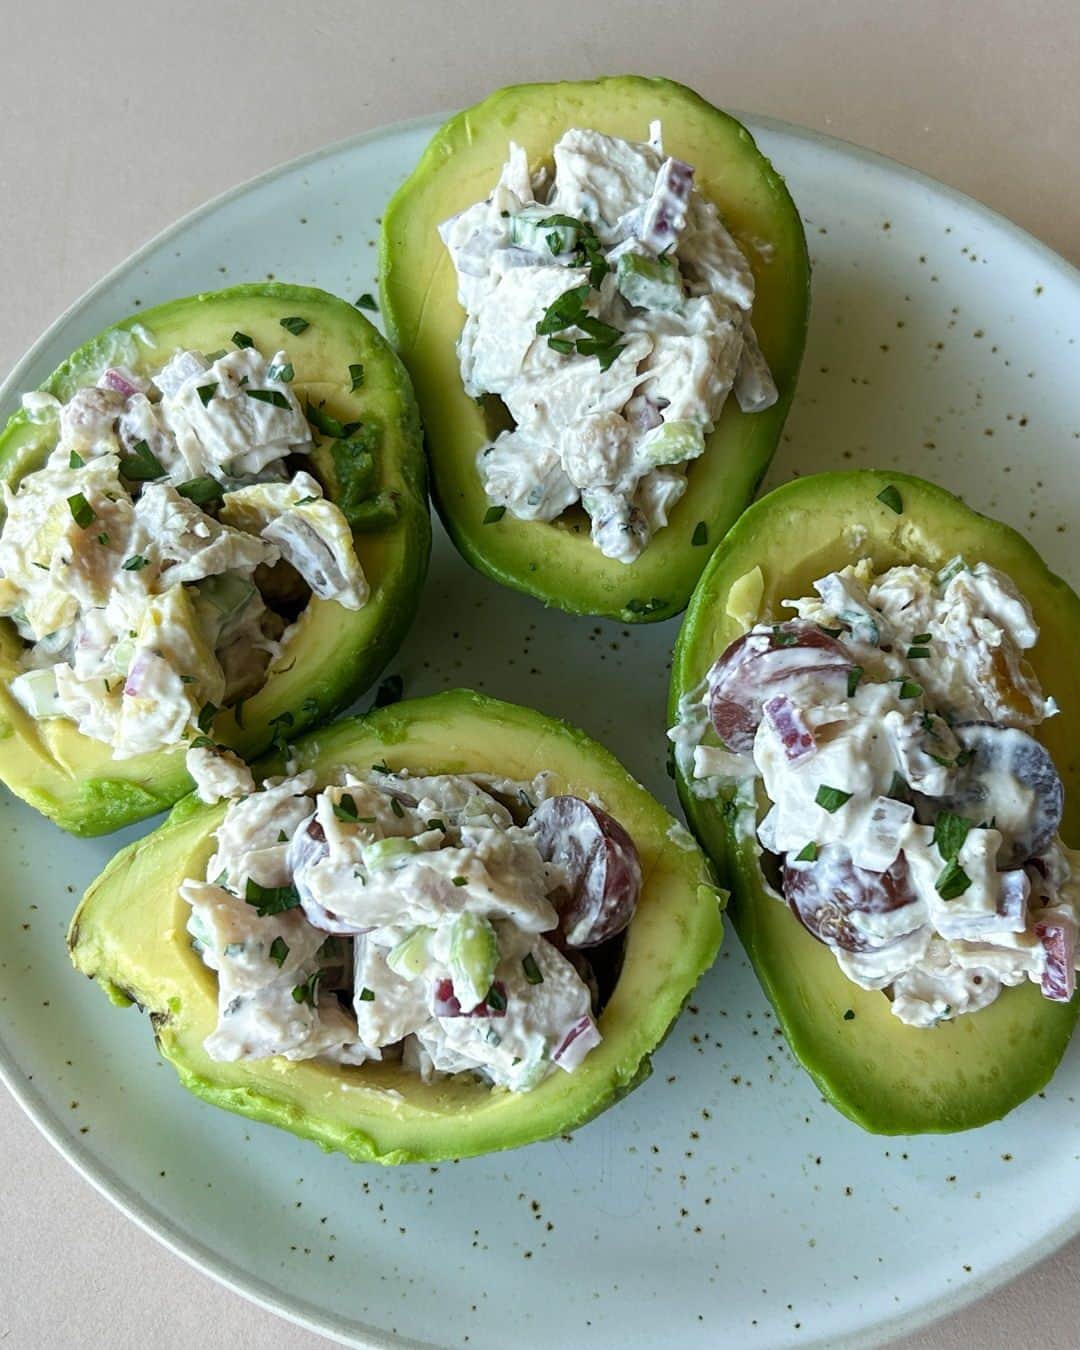 Food Republicさんのインスタグラム写真 - (Food RepublicInstagram)「Chicken Salad-Stuffed Avocados Recipe   Classic chicken salad gets a creamy, tangy twist with the audition of chopped avocado and Greek yogurt...and then it's stuffed into an avocado.  Recipe developed in collaboration with @alexanderbakes   Prep Time: 15 minutes  Cook Time: 0 minutes  Servings: 4 servings   Ingredients: - ½ cup Greek yogurt - ½ cup mayonnaise - 1 teaspoon yellow mustard - 2 tablespoons lemon juice - 1 teaspoon salt - ¼ teaspoon ground black pepper - 4 cups cooked chicken, chopped - ¼ red onion, diced - 3 stalks celery, diced - 3 tablespoons chopped parsley, divided - 1 cup grapes, halved - ⅓ cup chopped walnuts - 2 medium-ripe avocados  Directions:  1. Add Greek yogurt, mayonnaise, yellow mustard, lemon juice, salt, and pepper to a large bowl. Whisk to combine.  2. Add the chopped chicken, onion, celery, 2 tablespoons parsley, grapes, and walnuts to the bowl. Mix until all ingredients are coated in dressing.  3. Cut avocados in half and remove pits. Carefully remove peel, leaving the avocados in full halves.  4. Scoop out 2 spoonfuls of the avocado meat, leaving the avocado half intact.  5. Chop up the scooped-out avocado and stir it into the chicken salad.  6. Fill the avocado halves with a large spoonful of chicken salad.  7. Garnish with remaining parsley and serve immediately.  -  #recipes #recipeoftheday #cooking #easyrecipe #delicious #food #yum #easyrecipes #yummy #healthyrecipe #instafood #healthyrecipes #foodie #tasty #homemade」10月11日 2時28分 - foodrepublic